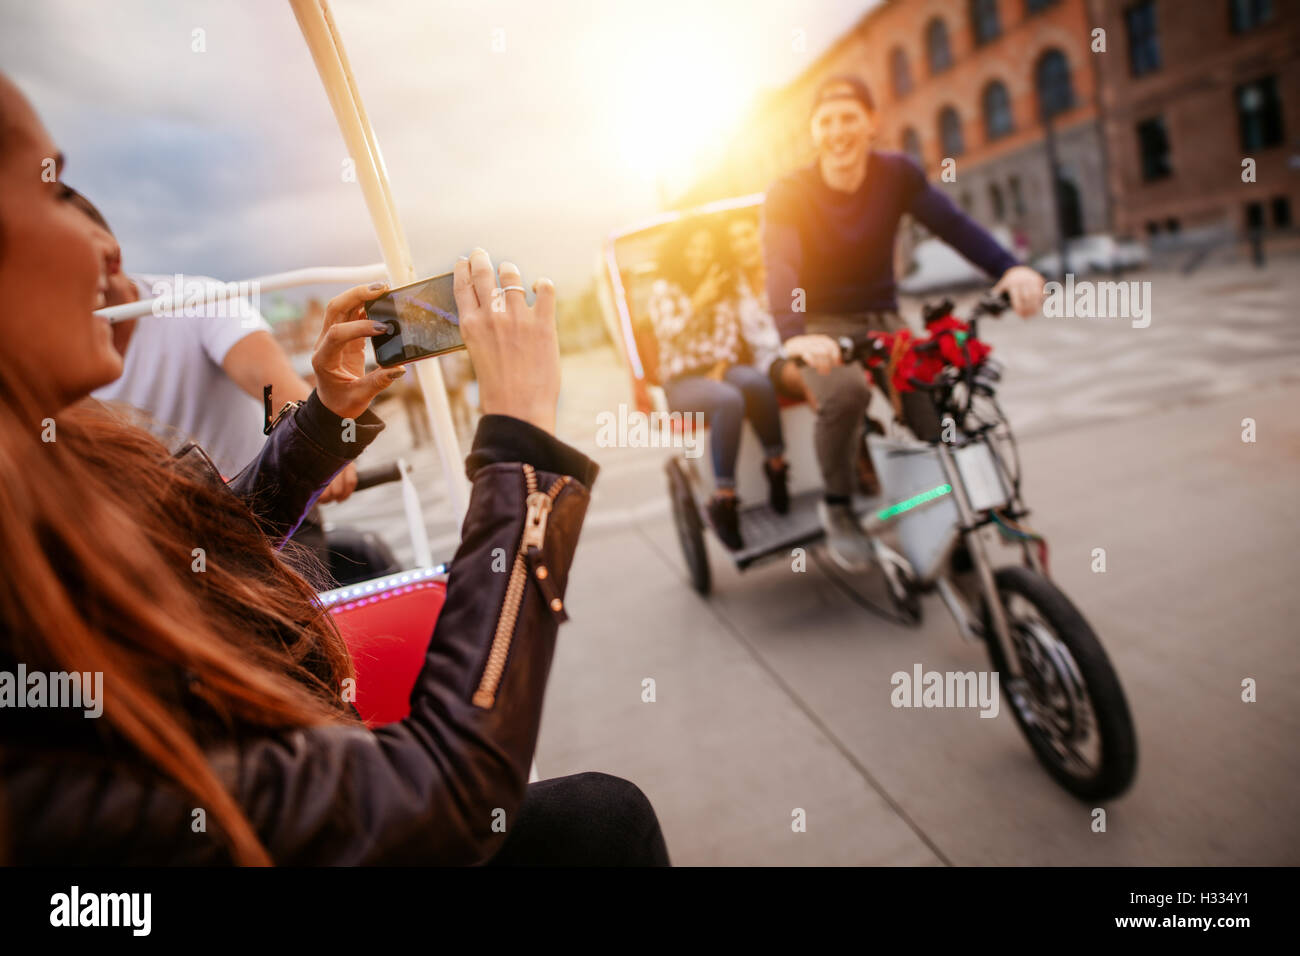 Woman photographing friends on tricycle ride. Teenagers having fun on vacation. Stock Photo